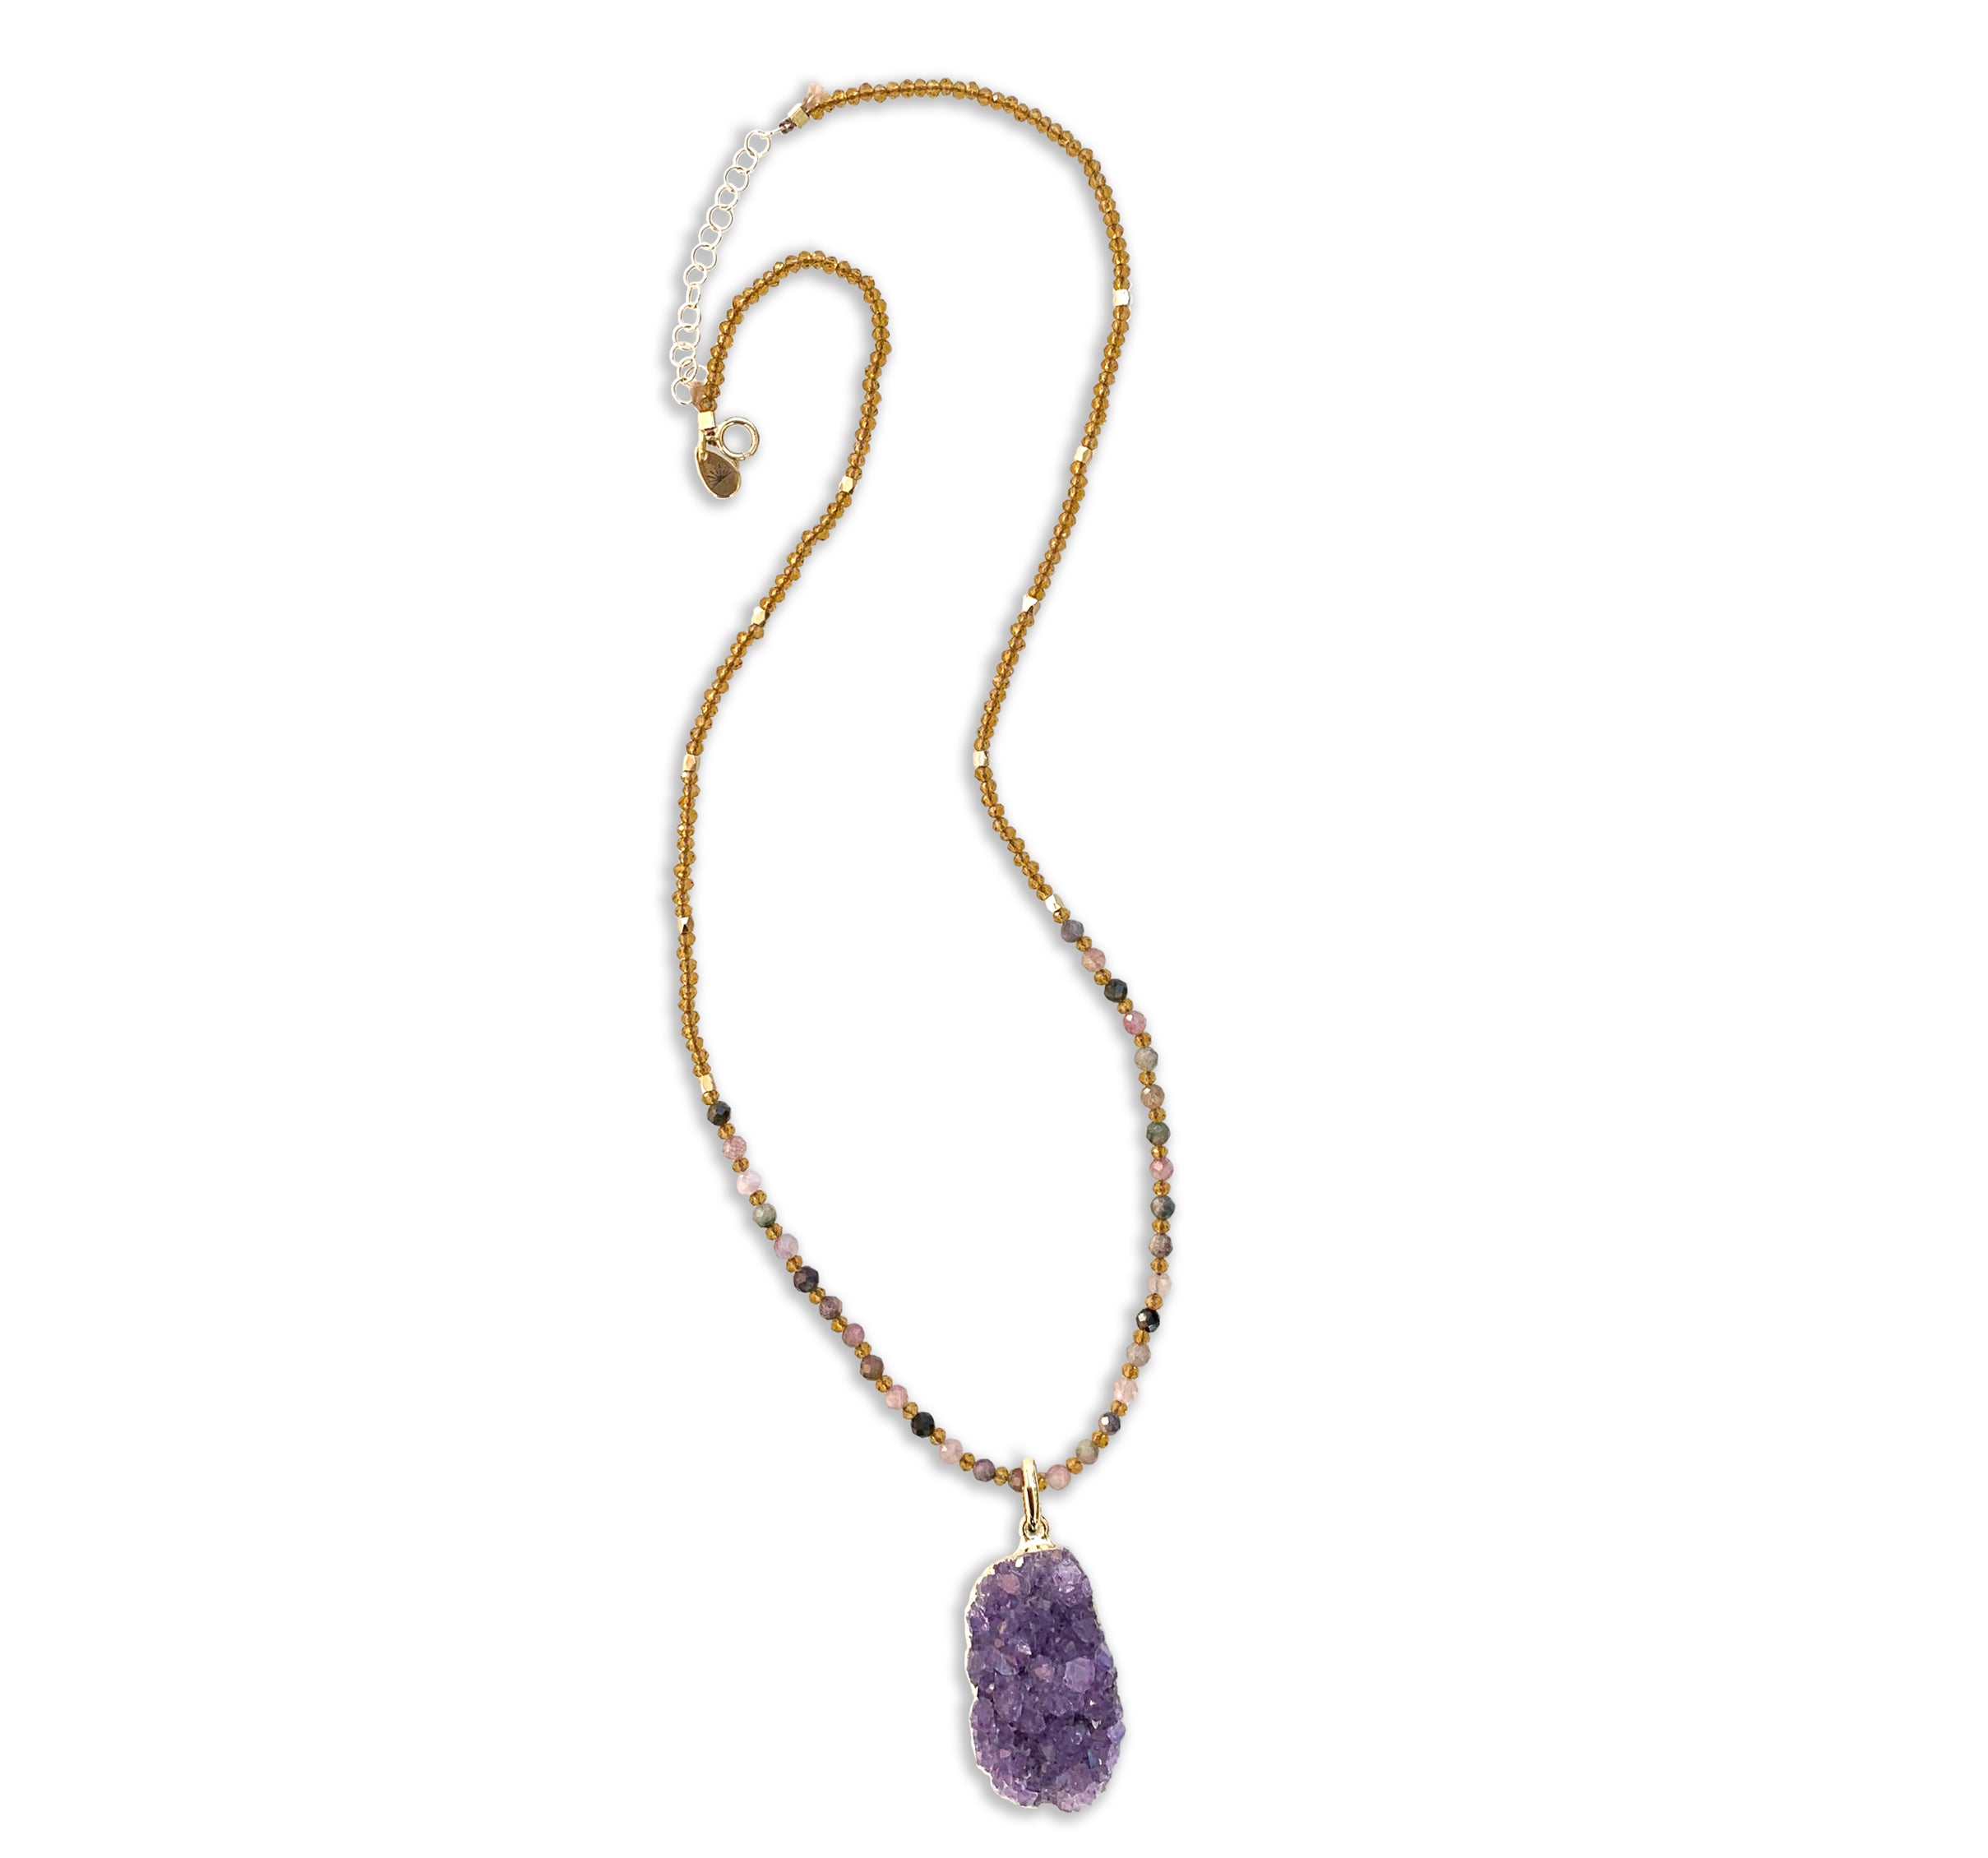 Cast-of-Stones-Tourmaline-Necklace-with-Amethyst-Druzy-Charm